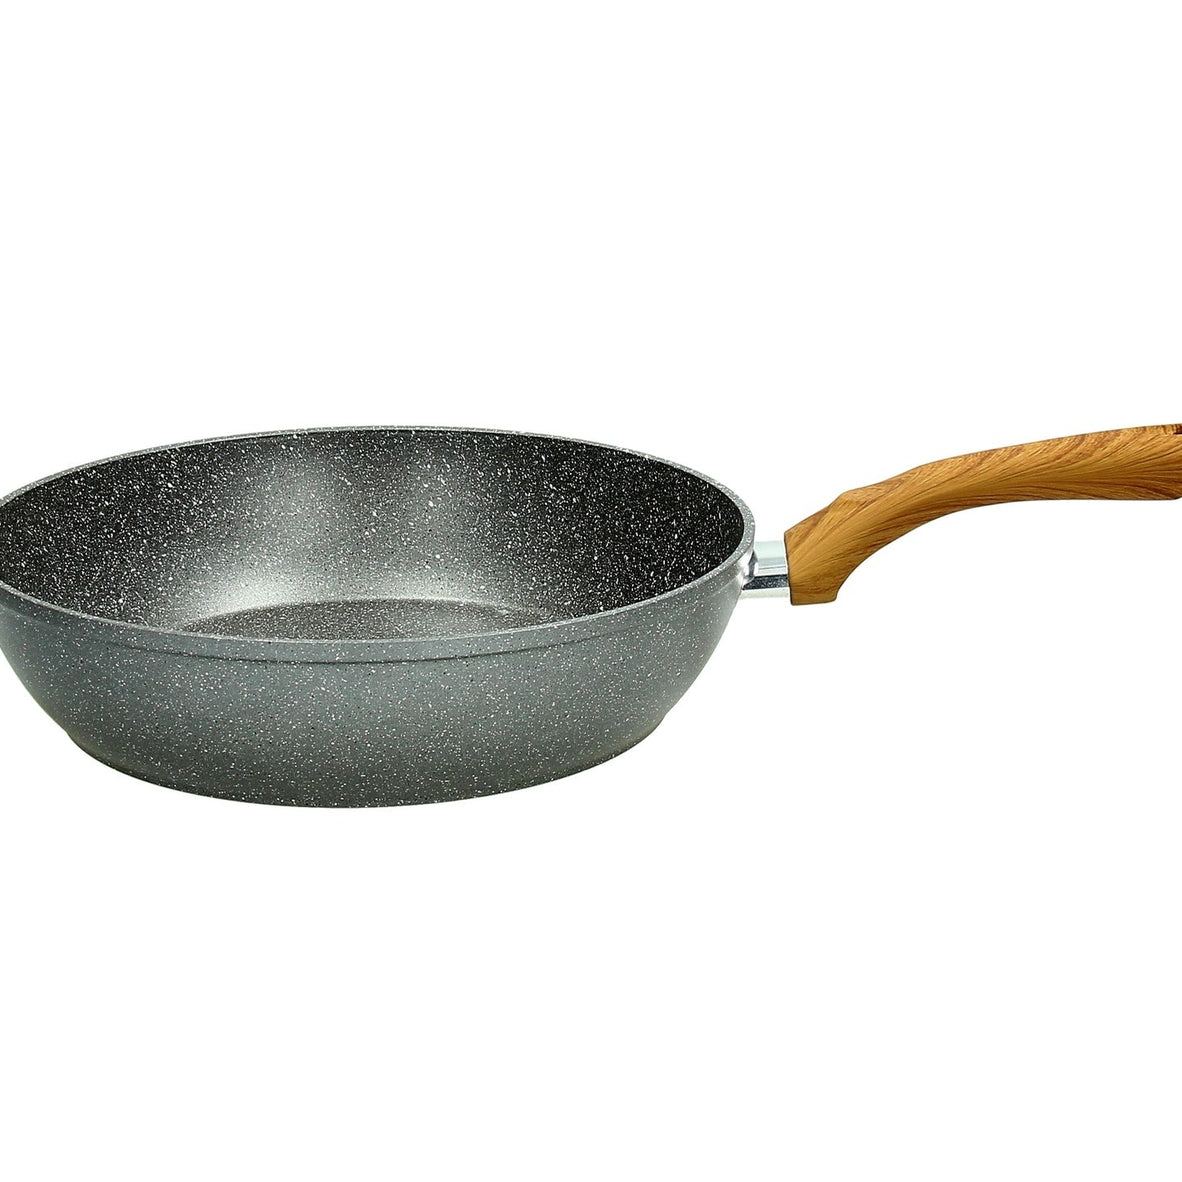 Wood & Stone Style Aluminum Nonstick 11" Deep Fry Pan - Kitchen Tools and Utensils